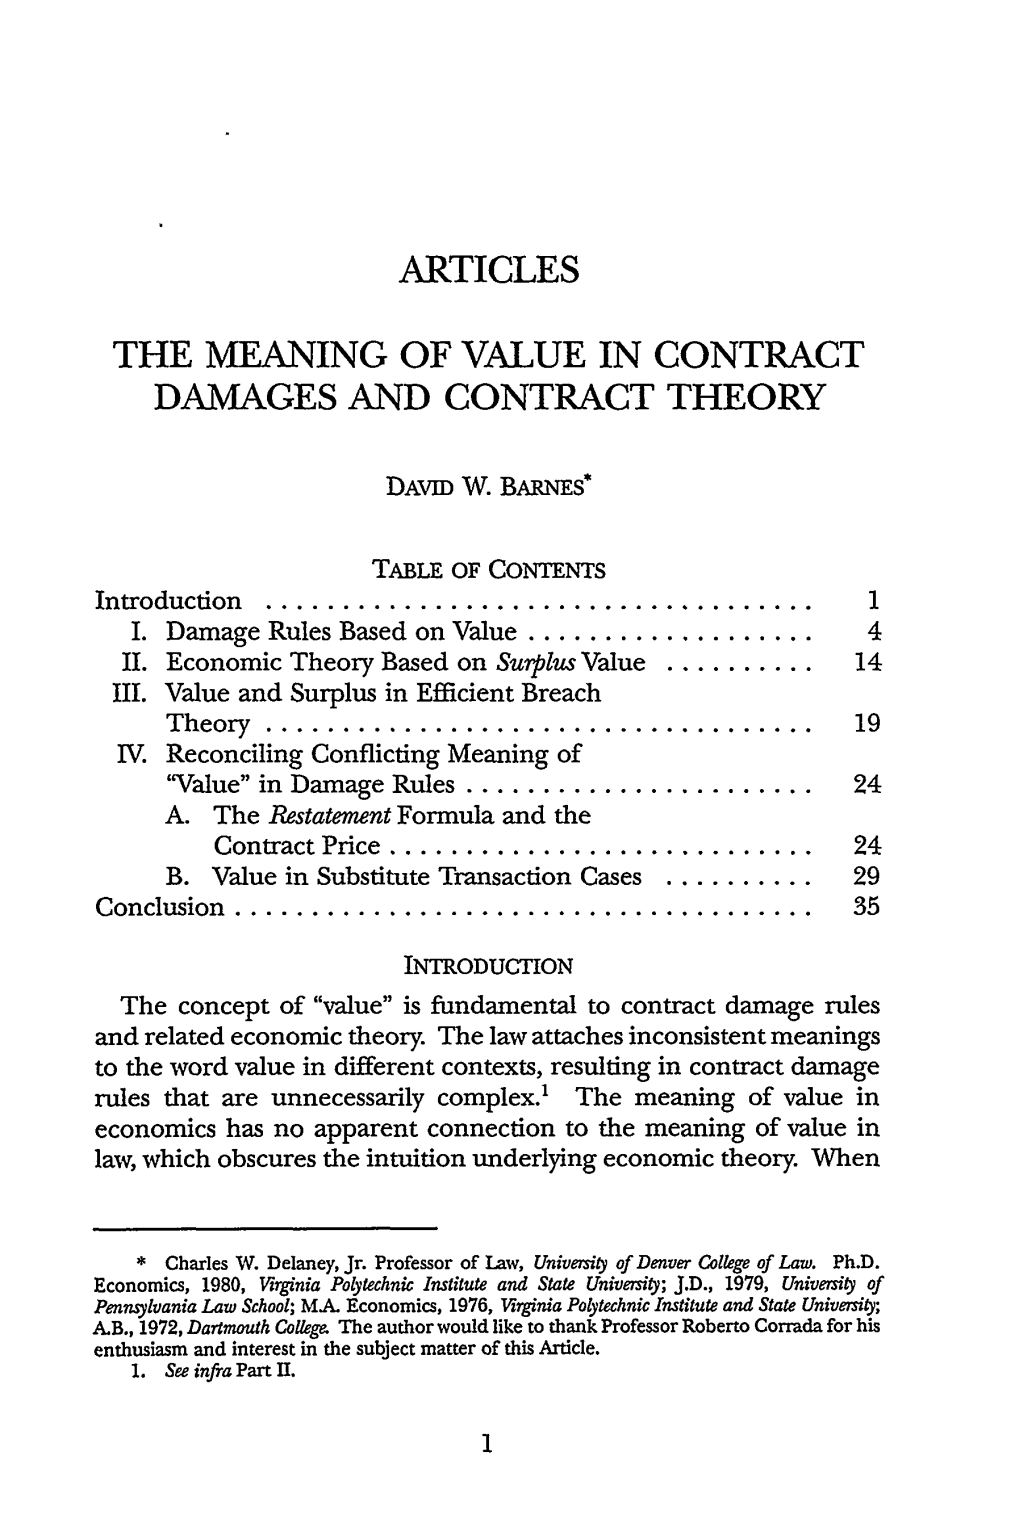 The Meaning of Value in Contract Damages and Contract Theory